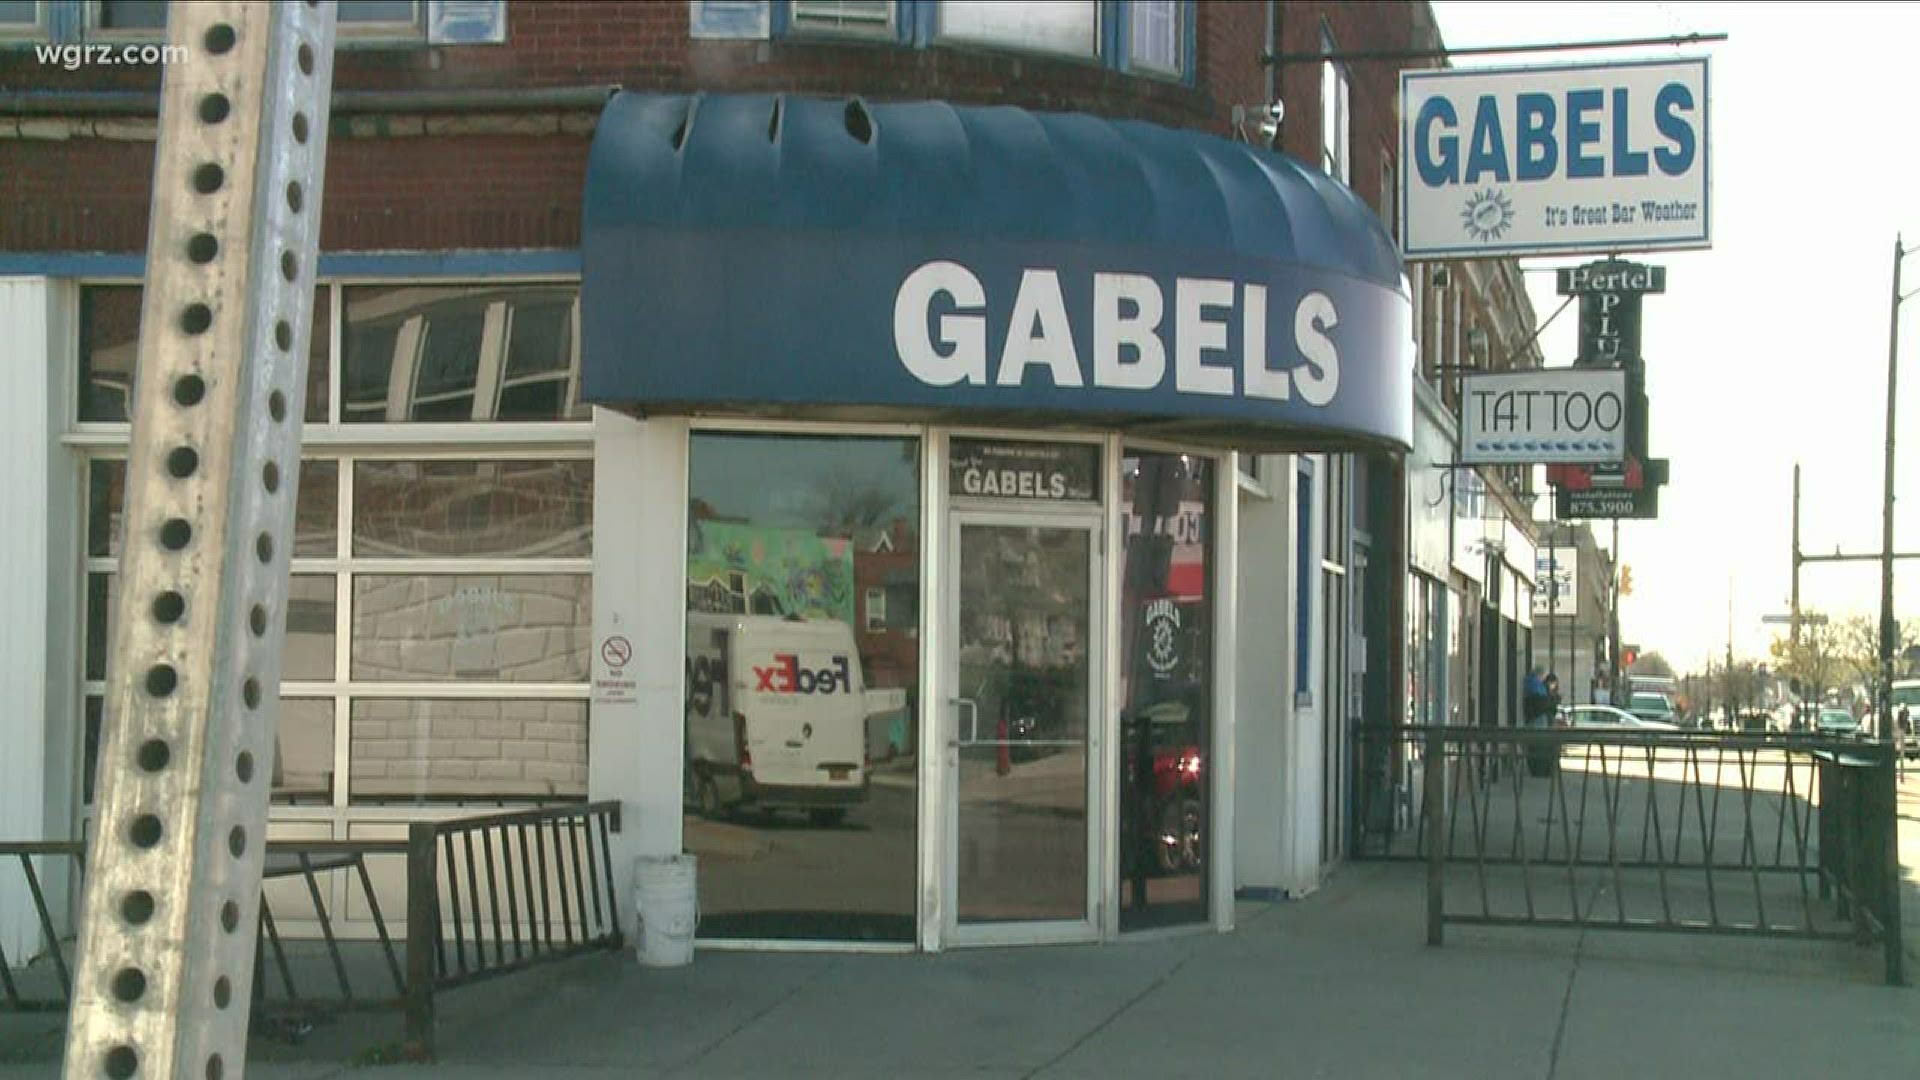 Gabels will now be reported to the state liquor authority... and could lose their liquor license like a few other bars already have... during this quarantine.